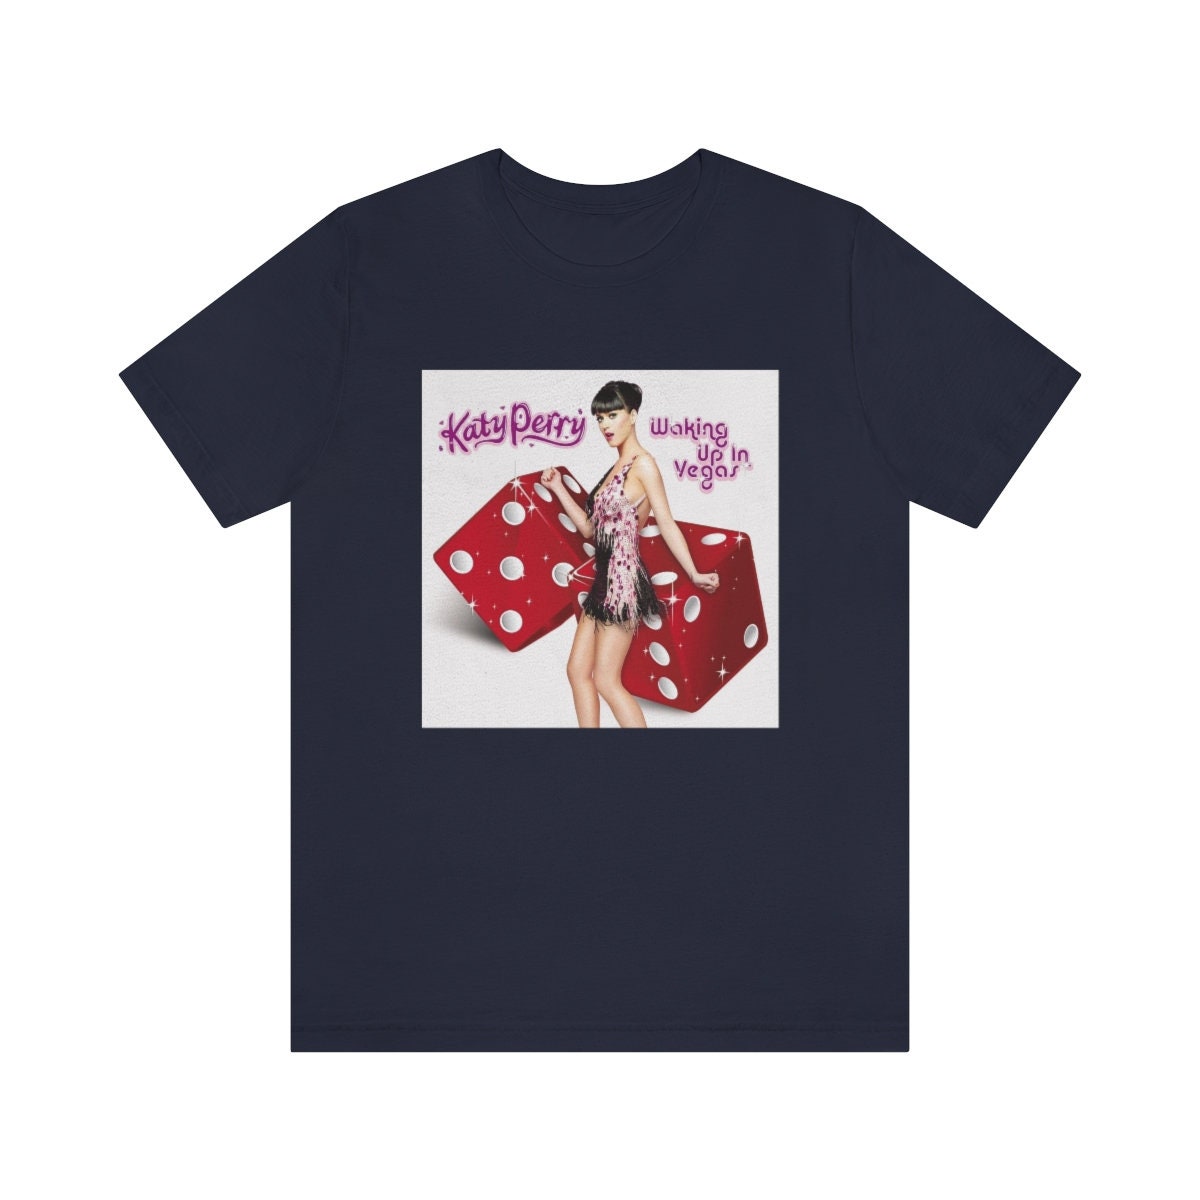 Discover Katy Perry - Waking Up in Vegas / Unisex Premium T-Shirt